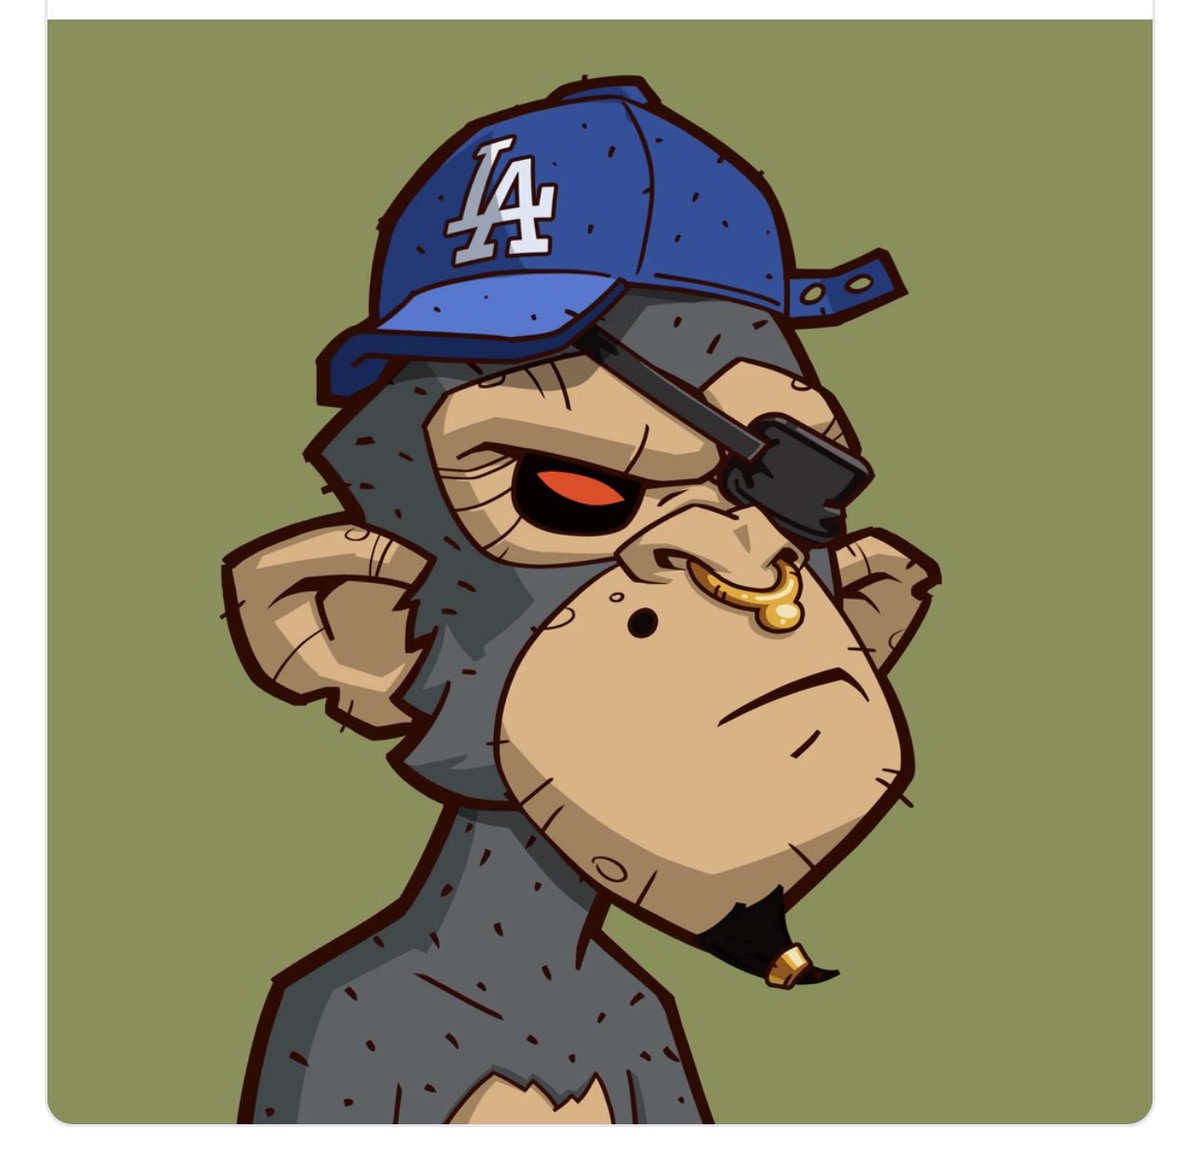 Shout out to @AngryApeNFTs for my apes!! I’m in LA area, grew up on the dodgers!! This ape is # 1022 which is also my birthday!! It was meant to be! Sooooo happy, the art and community are fire! Thank you for the love and support!! Means so much! #angryapes #community #famz